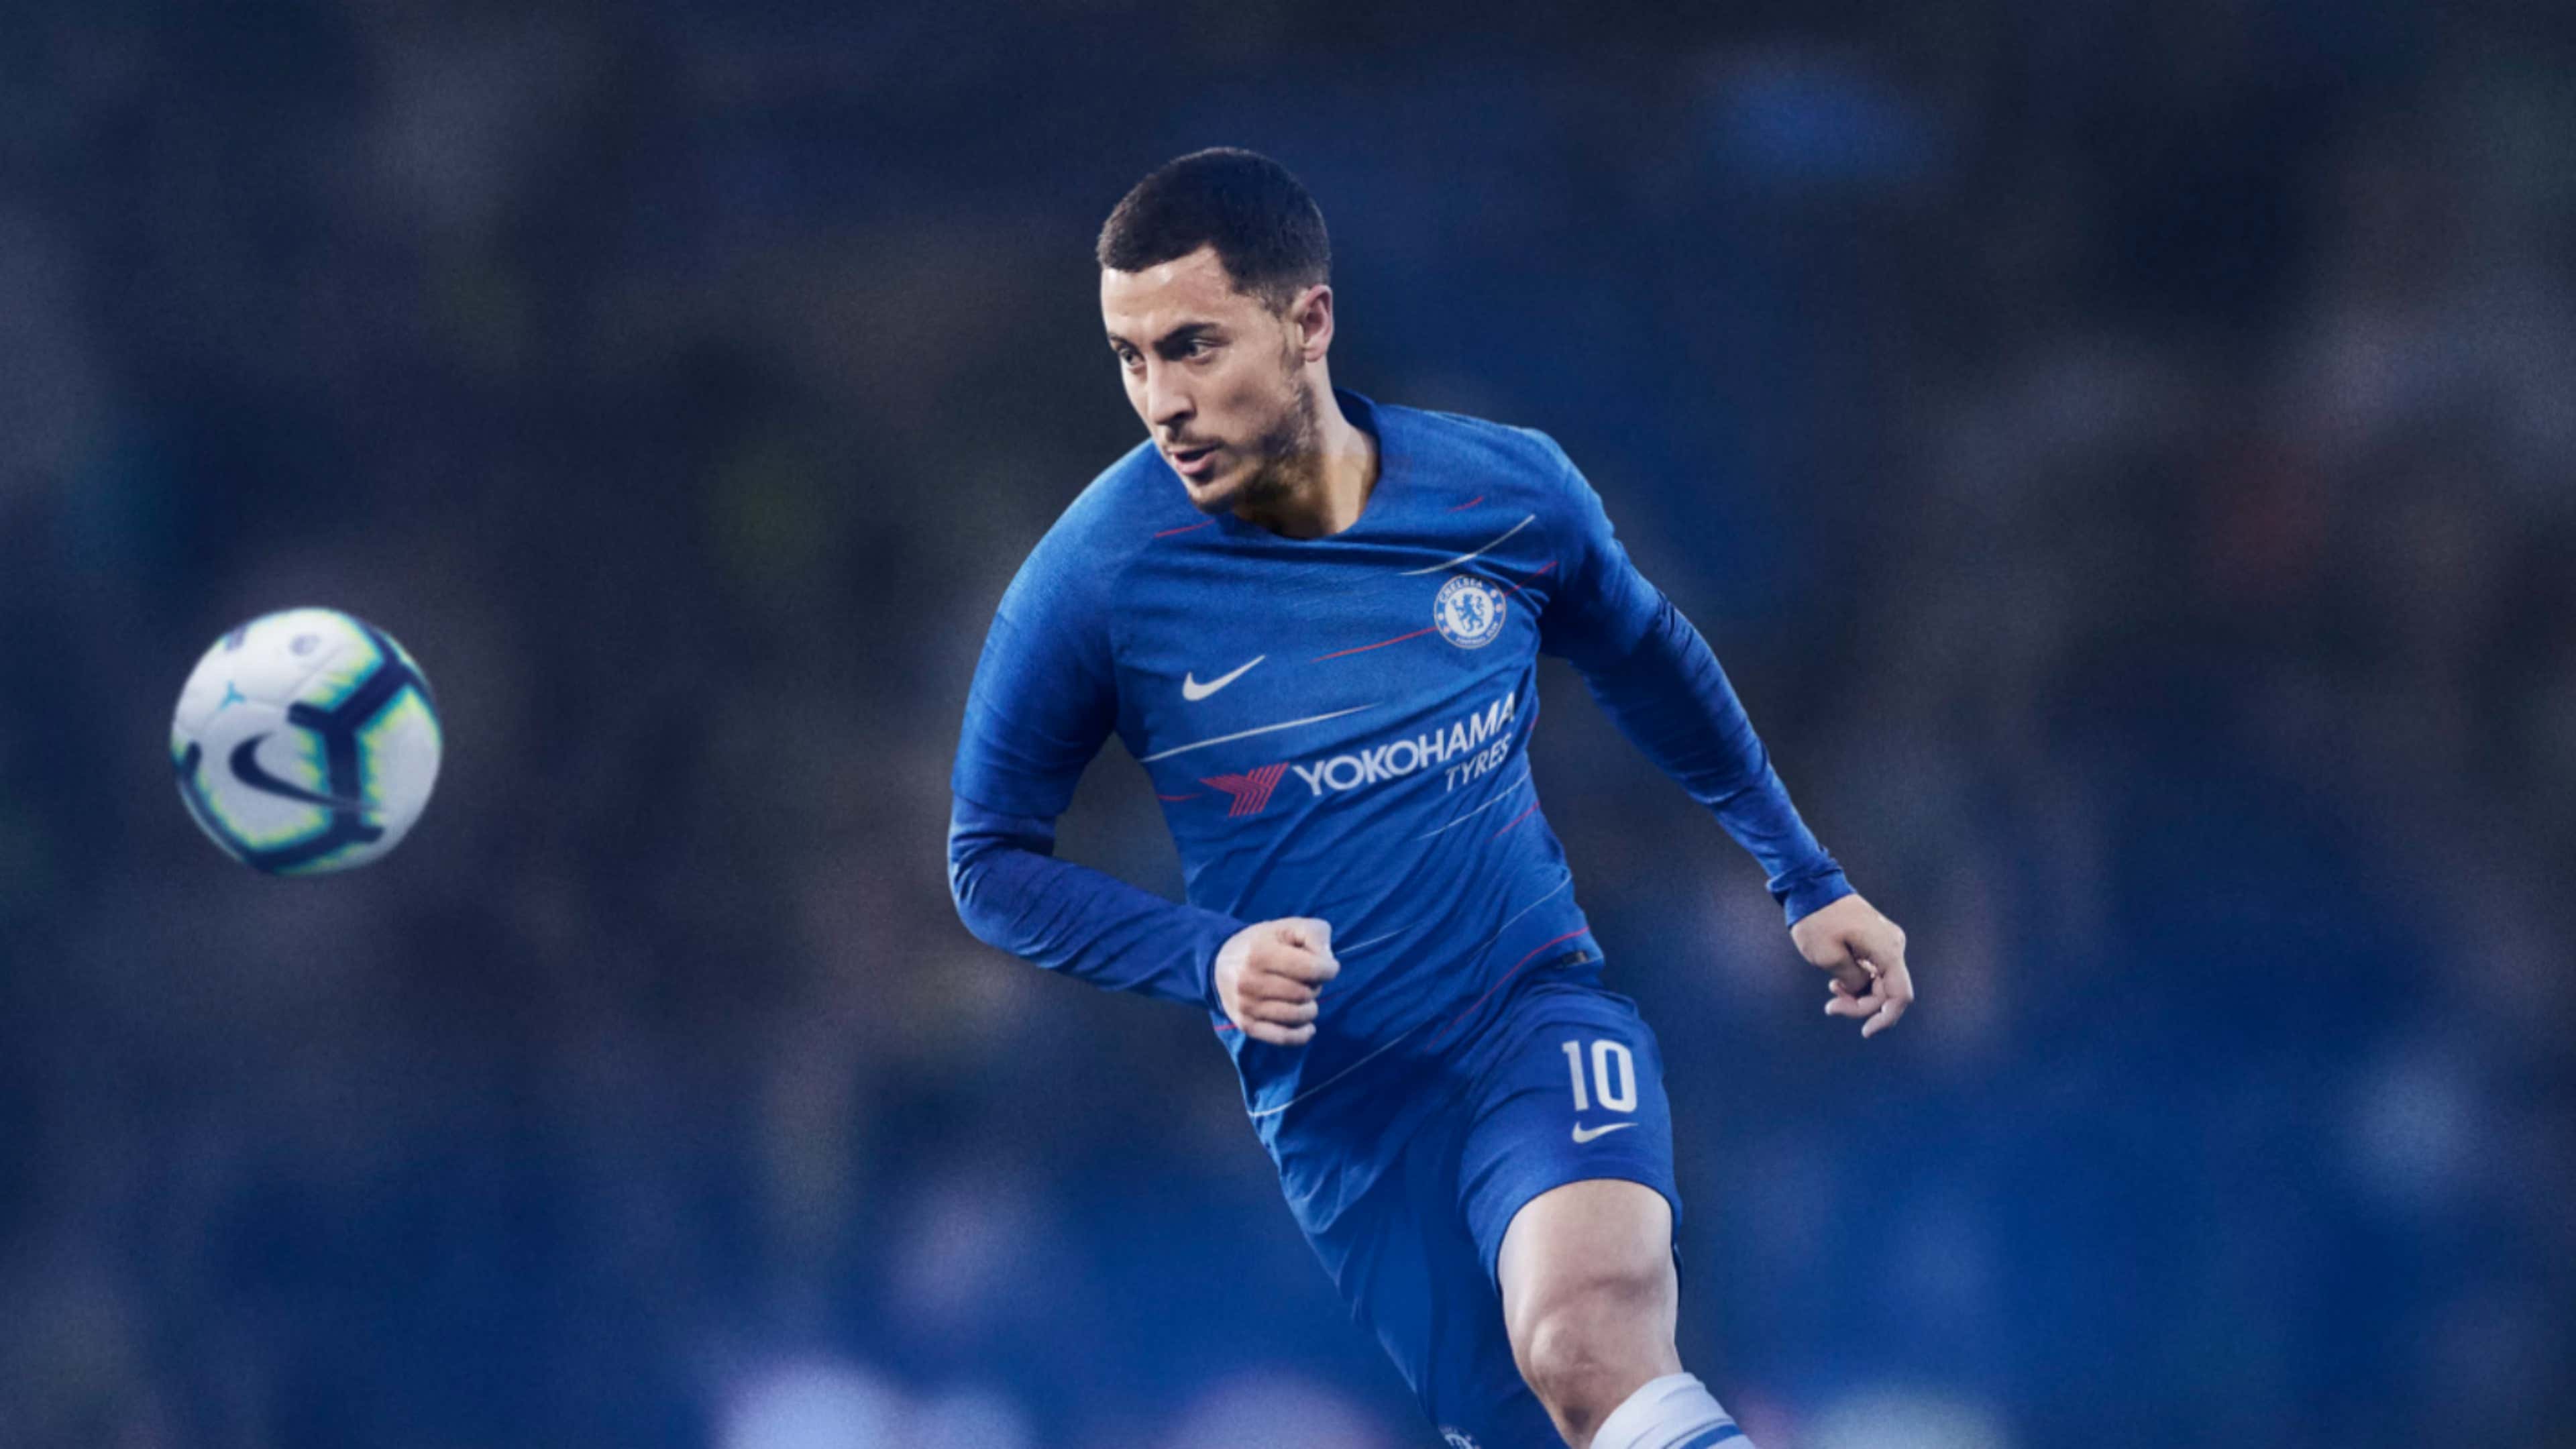 Chelsea unveil new home kit for the 2018-19 season